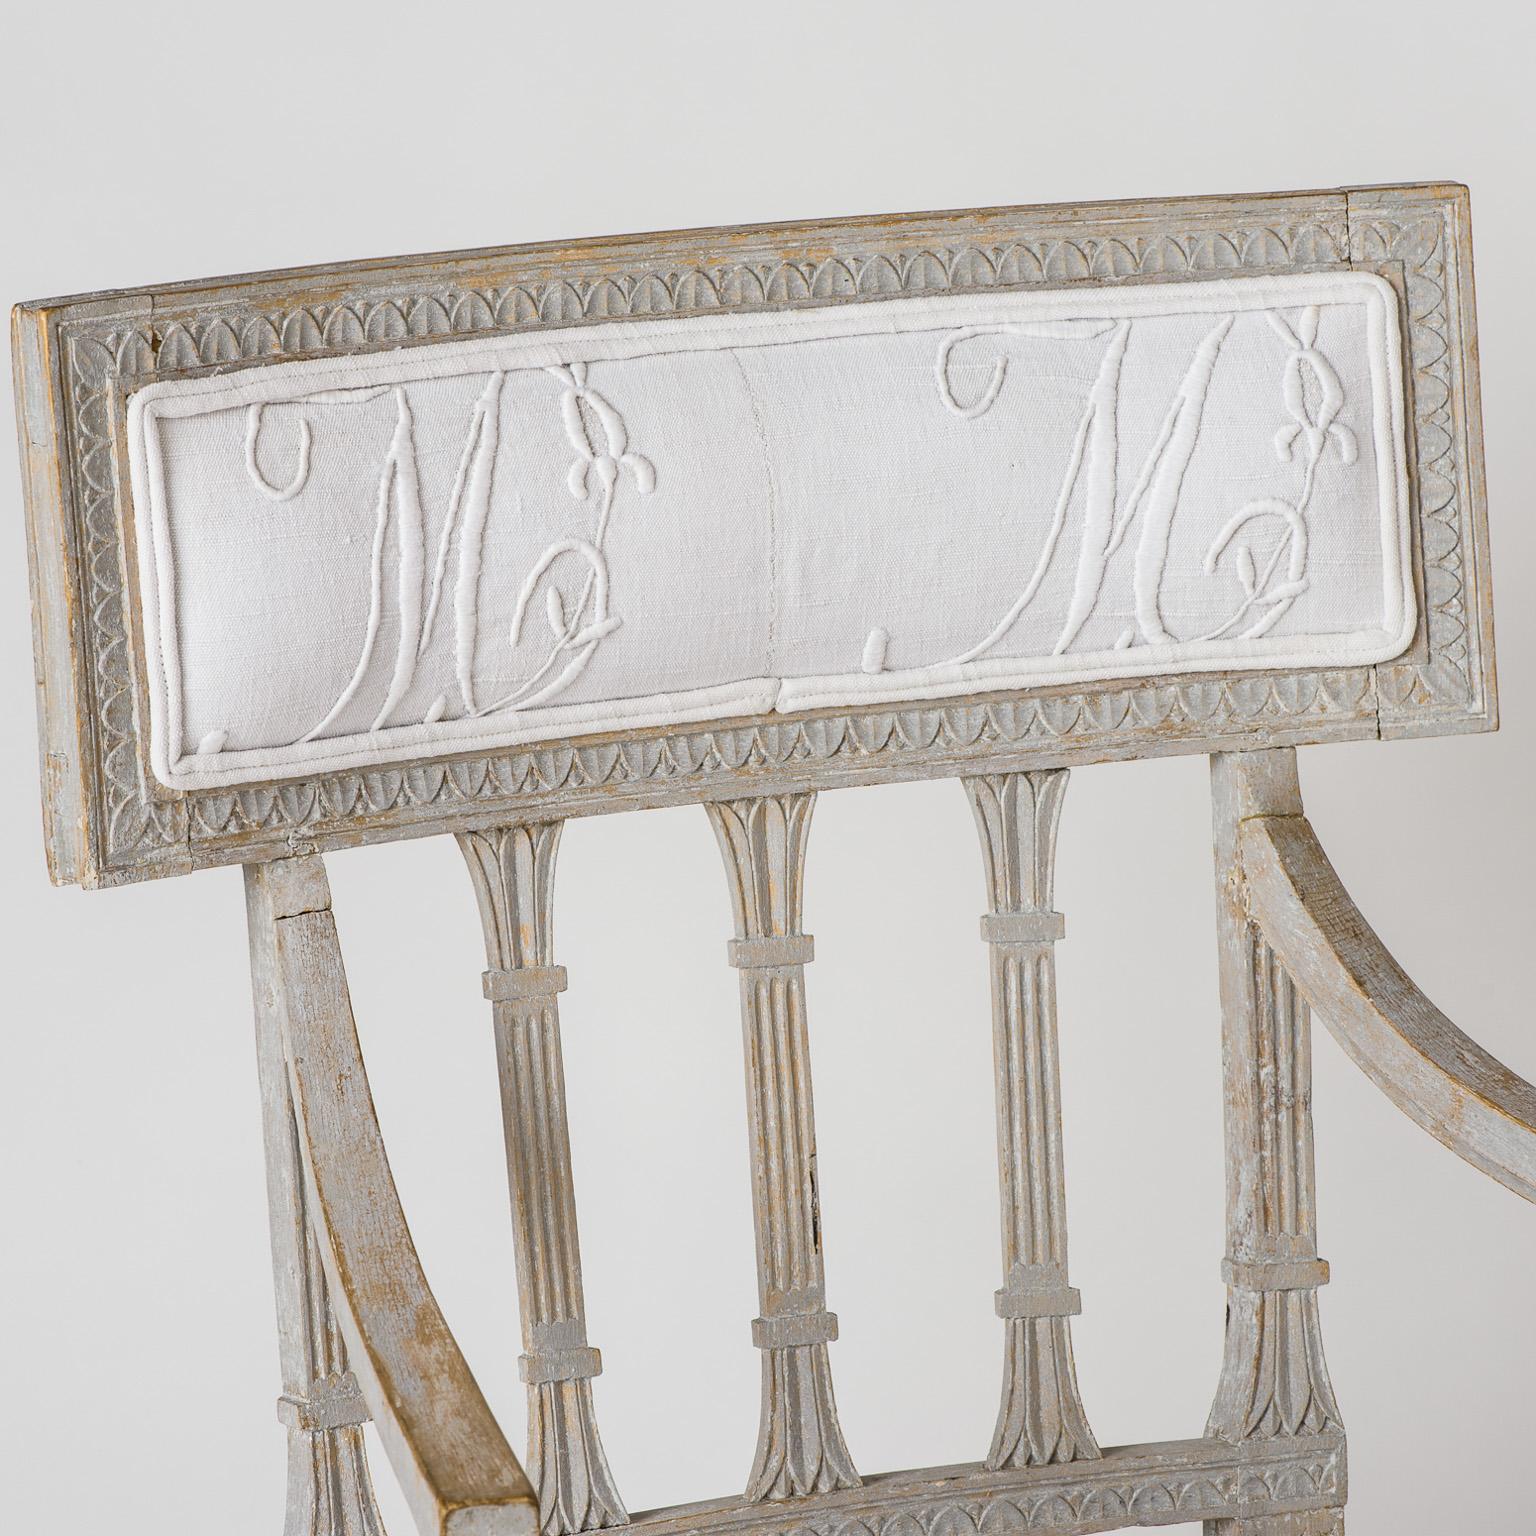 This elegant chair is a beautiful example of the best of Gustavian style with its sleek reeded back splats in the lotus pattern and detailed carvings on the legs and apron. The pale grey paint is original and has a beautiful patina. The chairs have